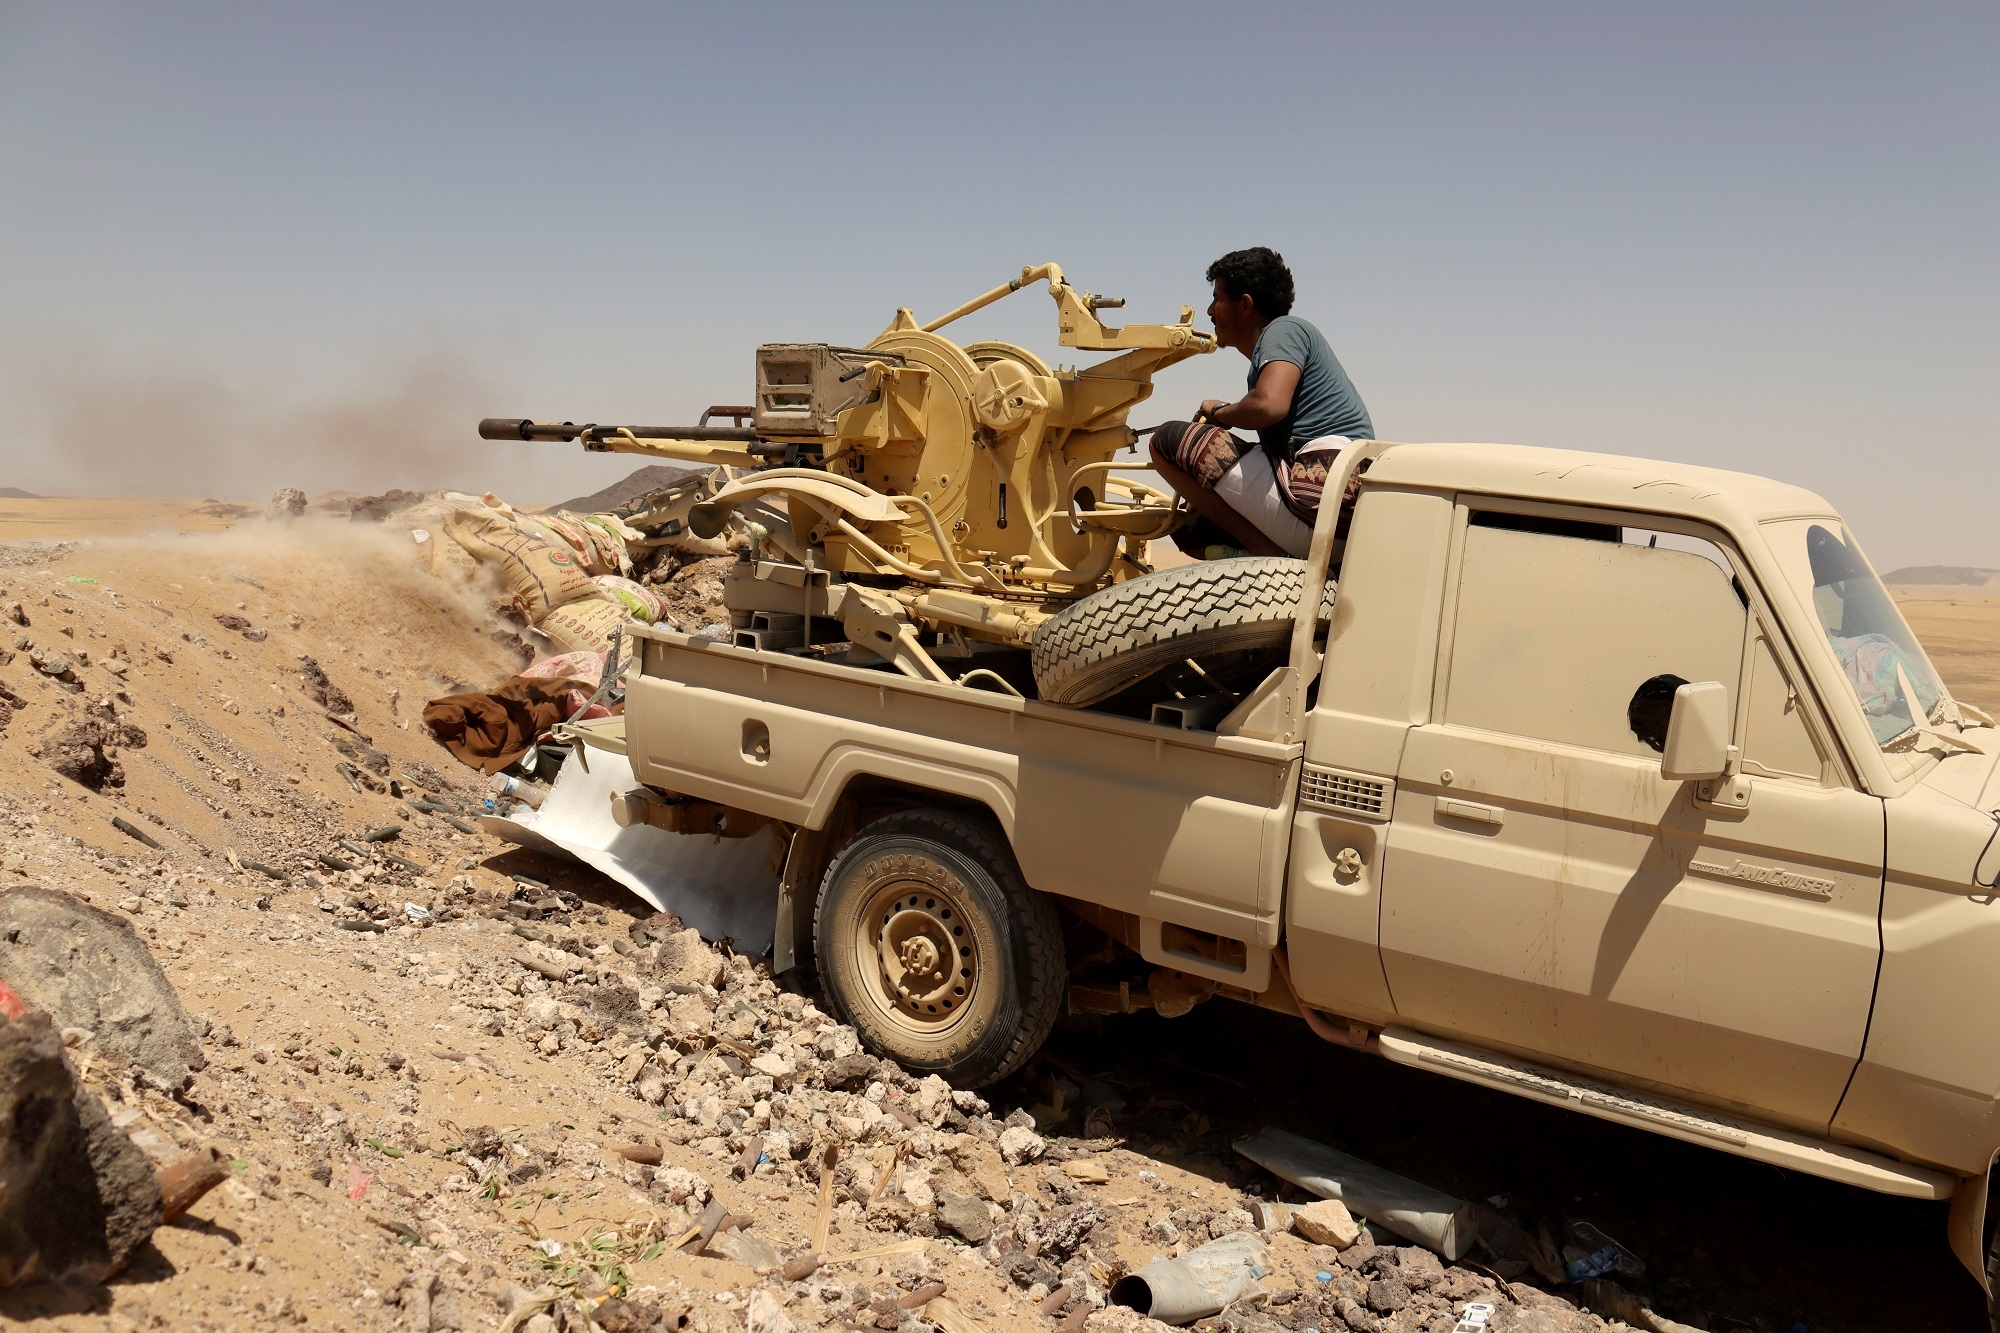 A Yemeni government fighter during battle against Houthi rebels in Marib